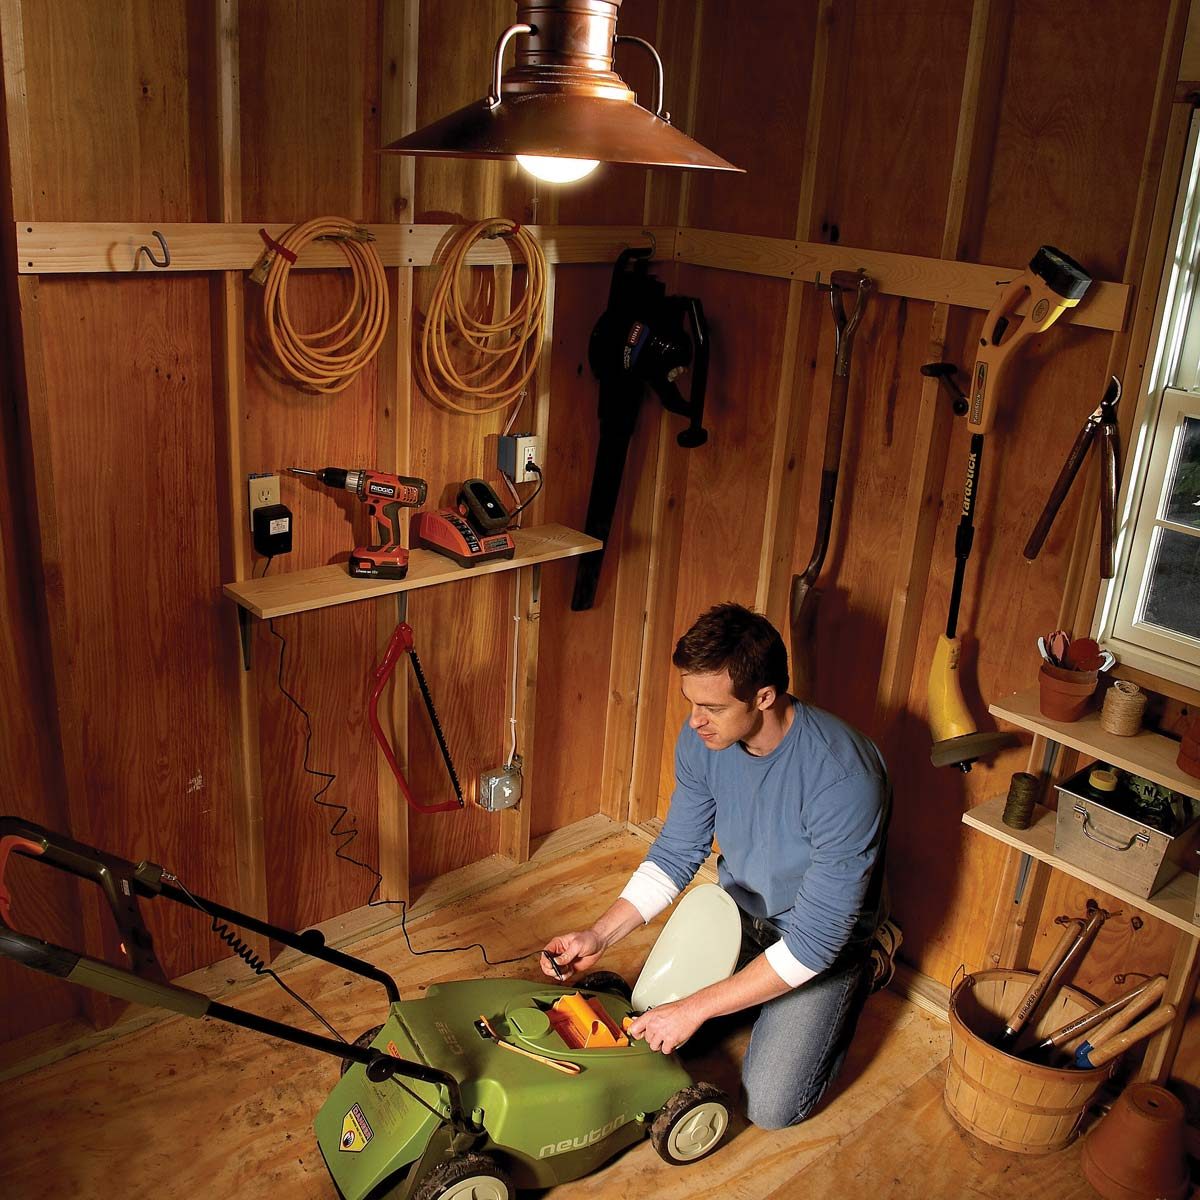 Electrical Wiring: How to Run Power Anywhere | Family Handyman